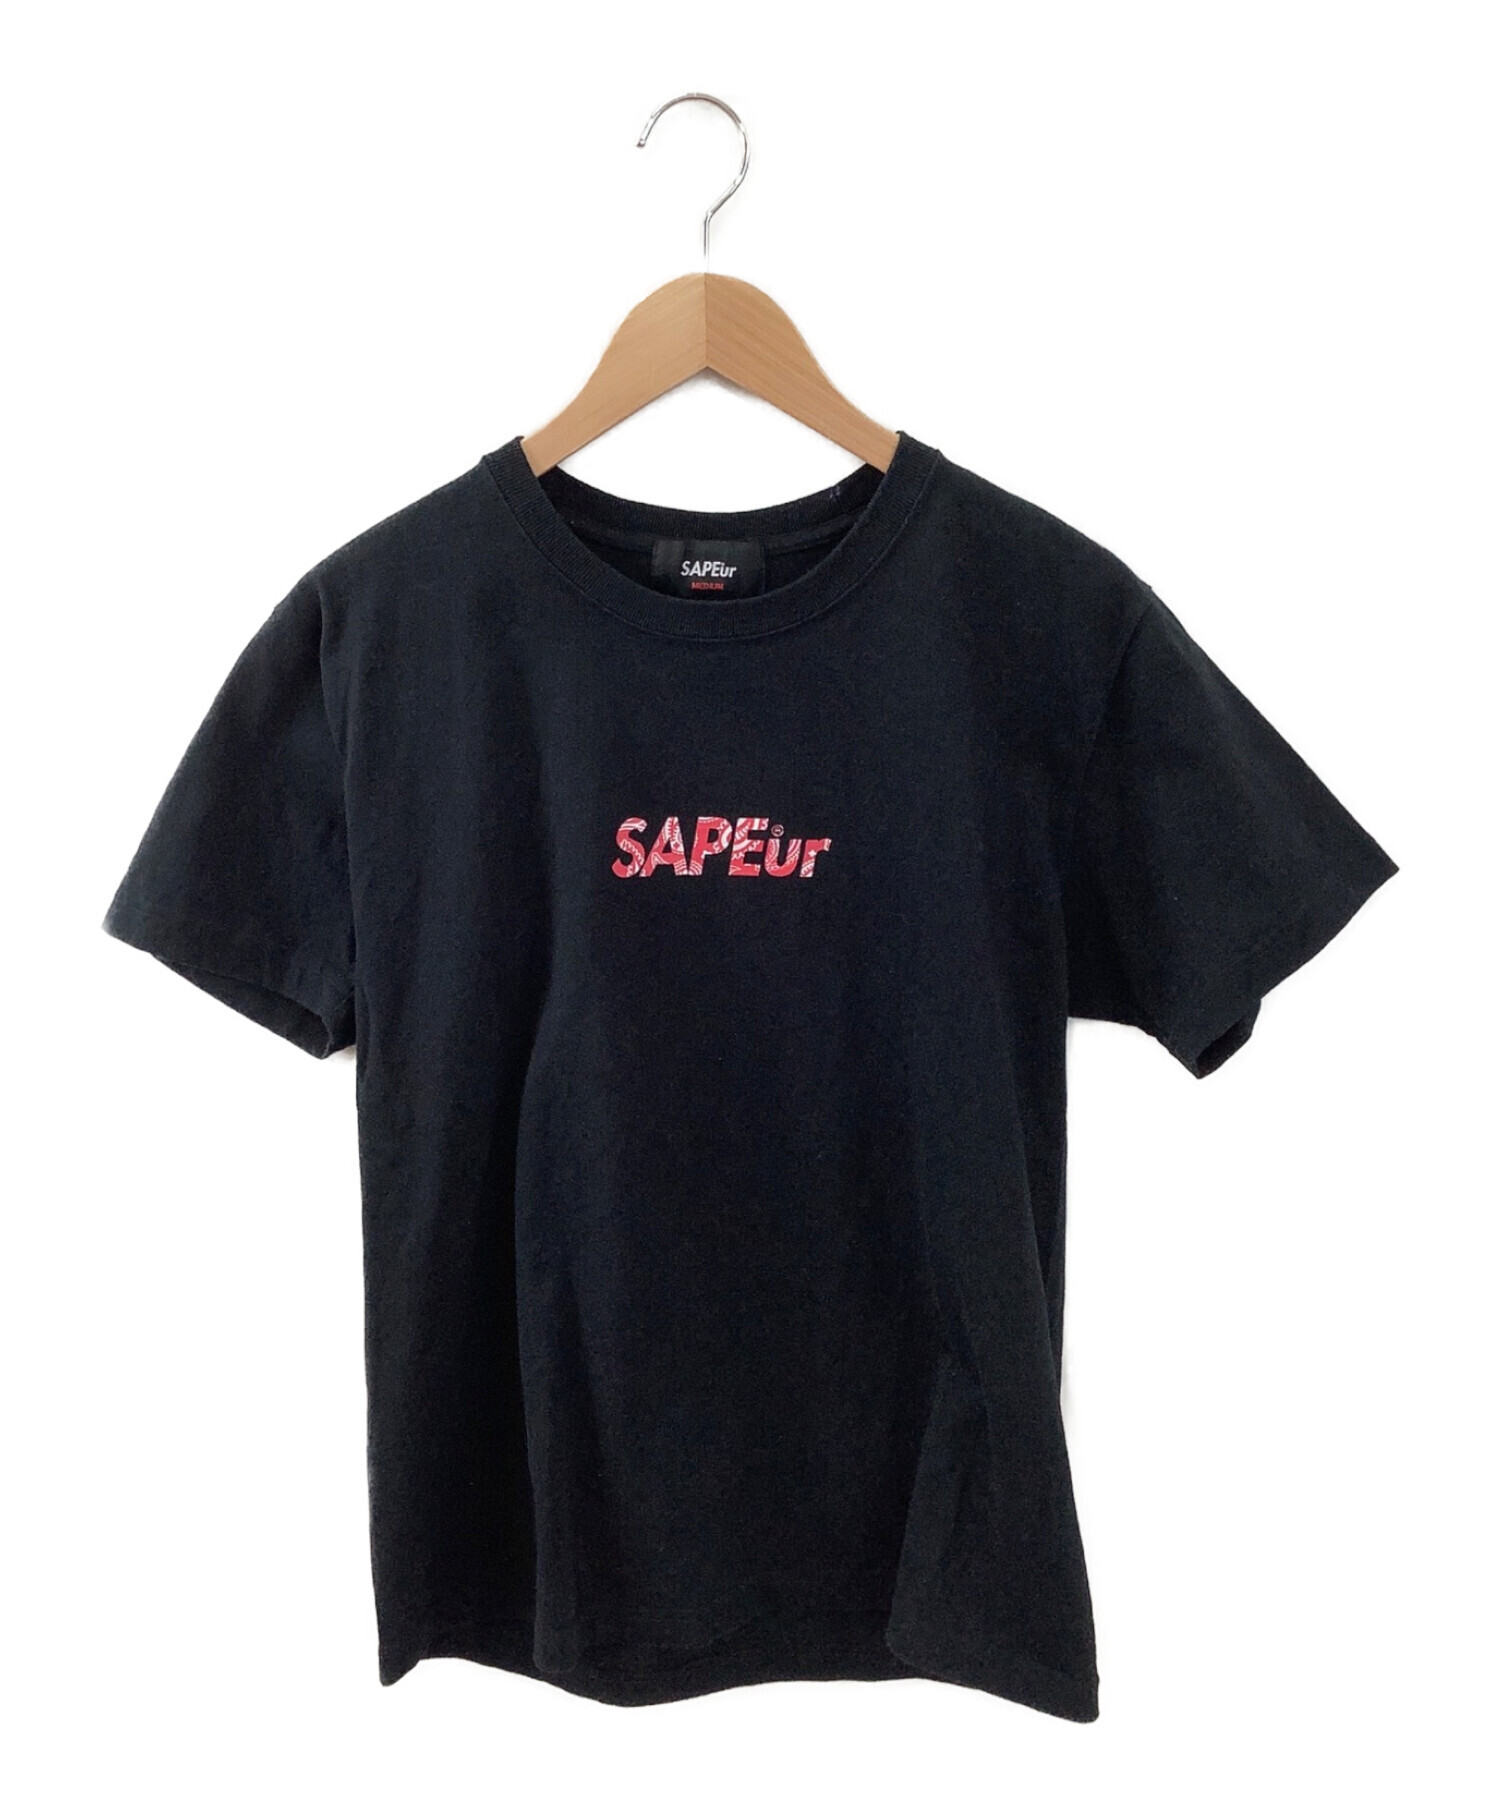 sapeurサプール Tシャツ